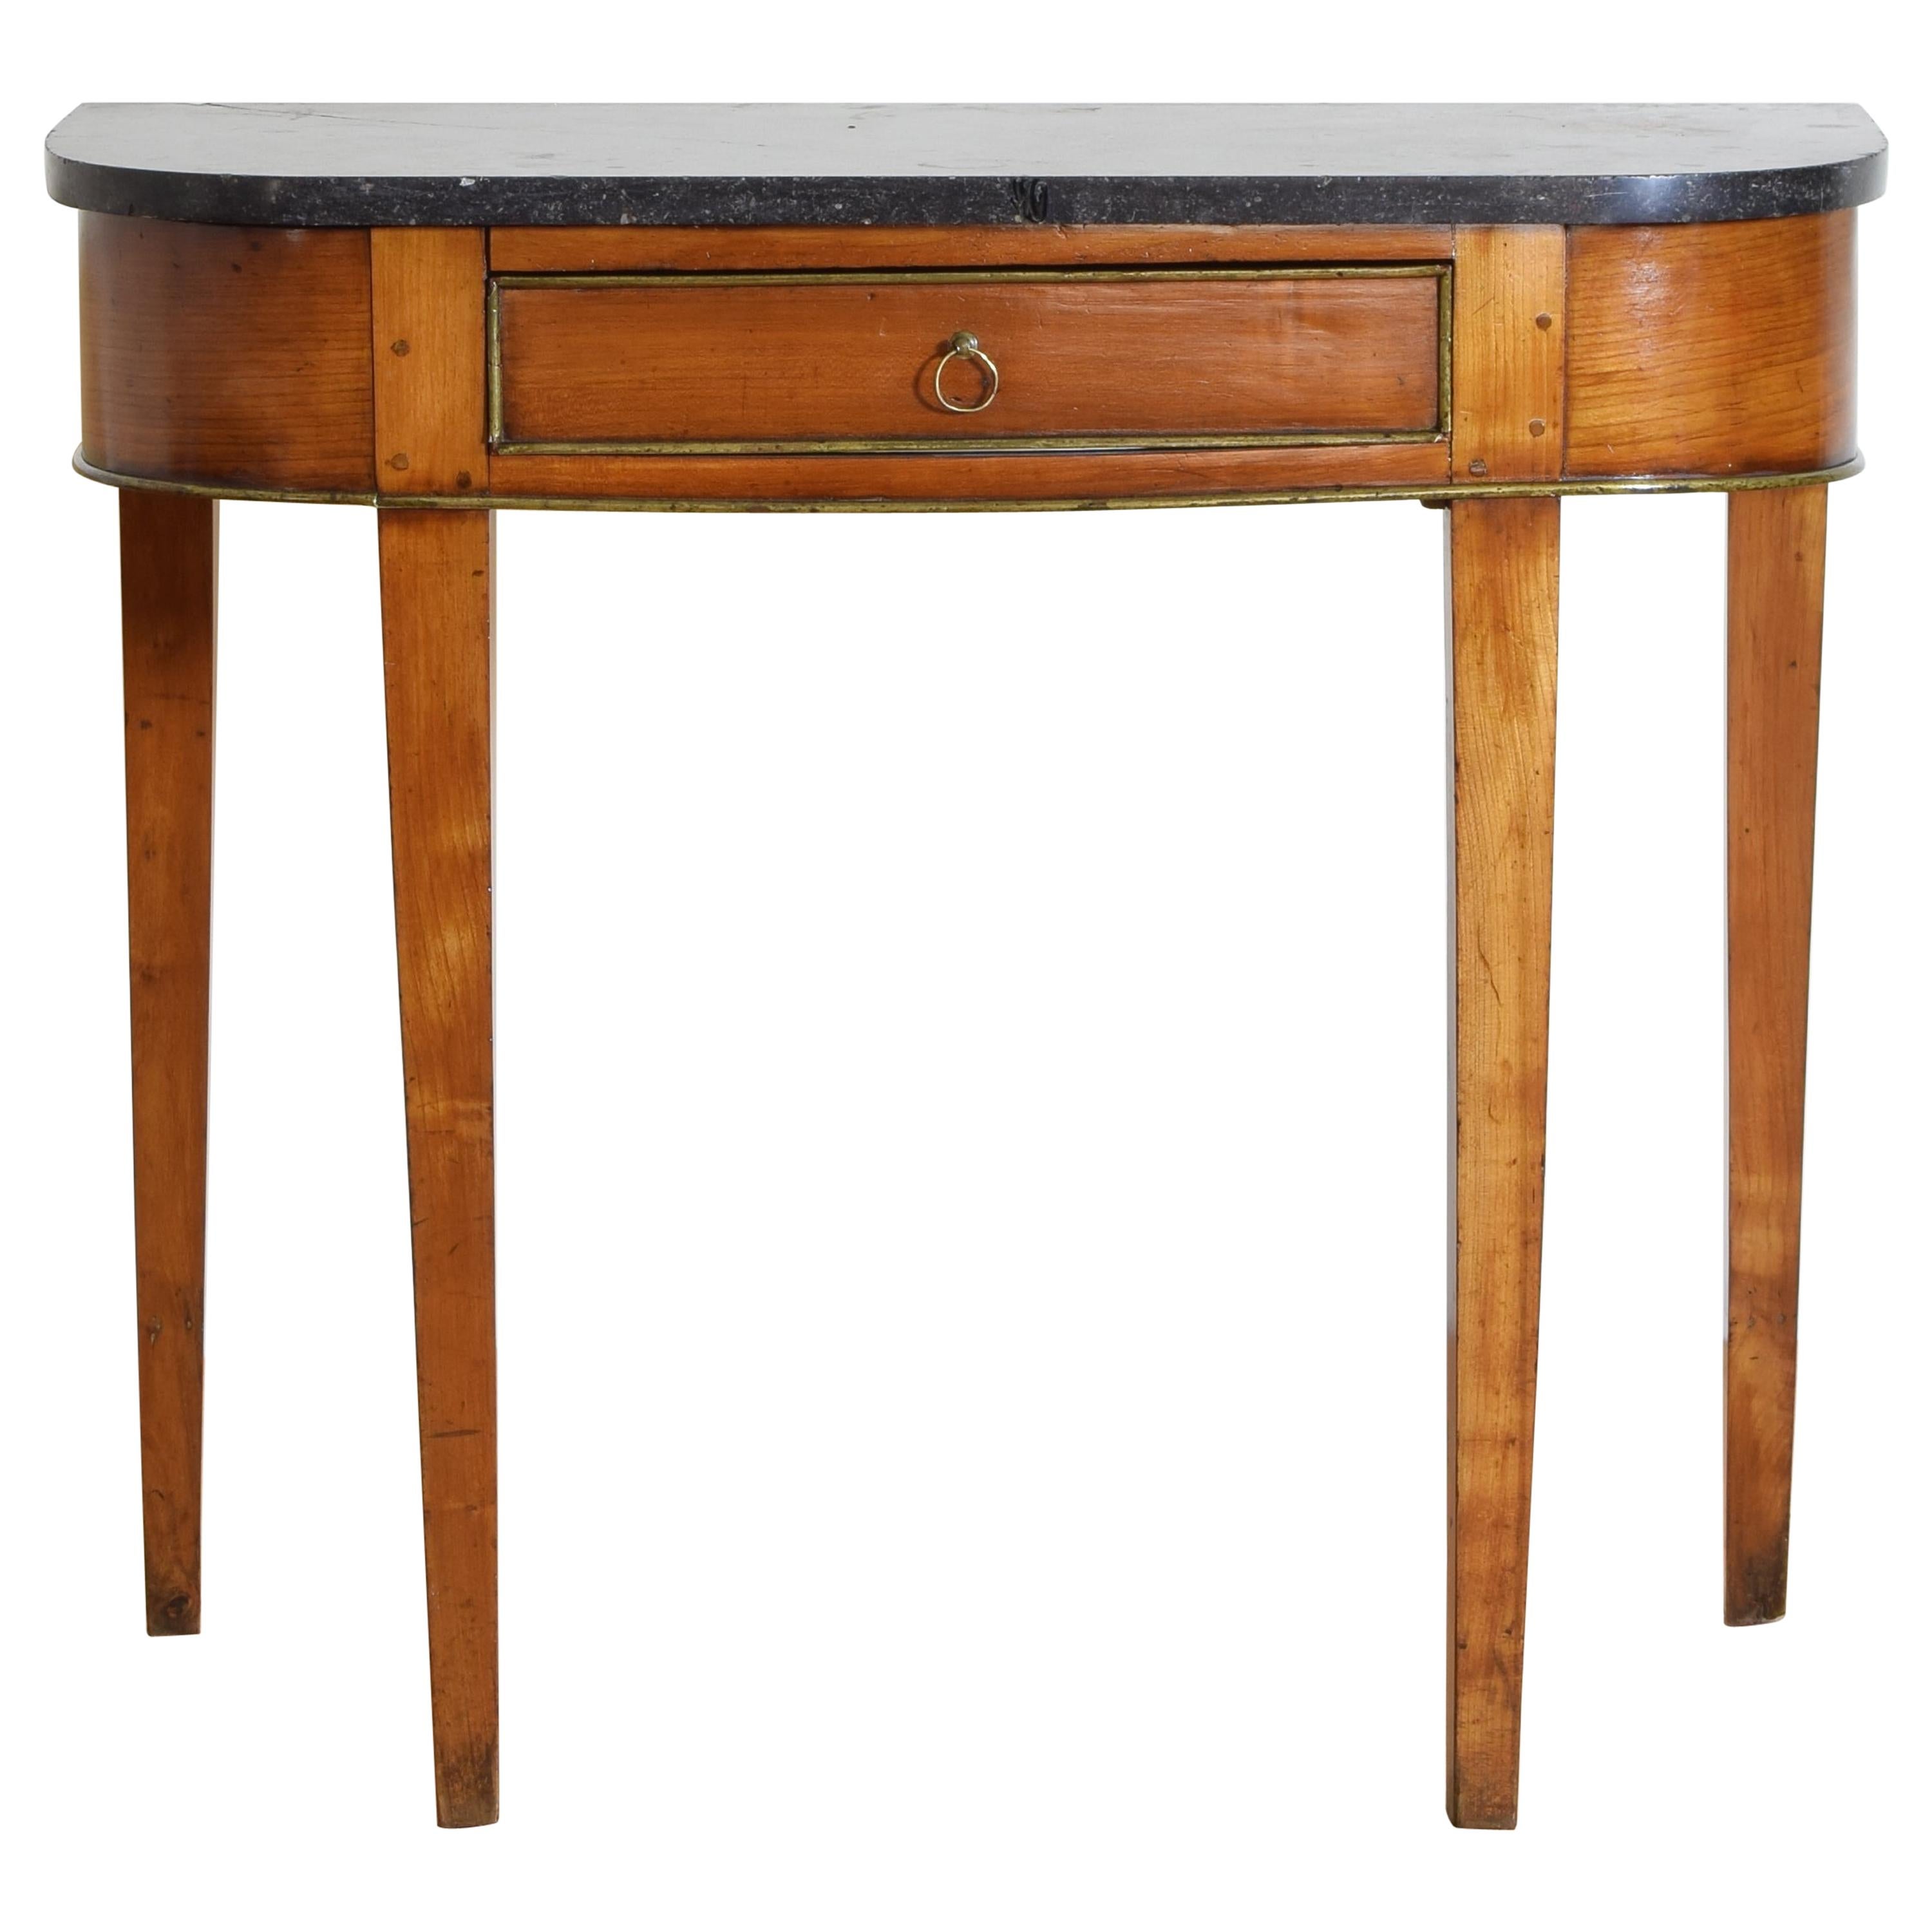 French Neoclassic Walnut, Brass, and Marble 1-Drawer Console Table, 19th Century